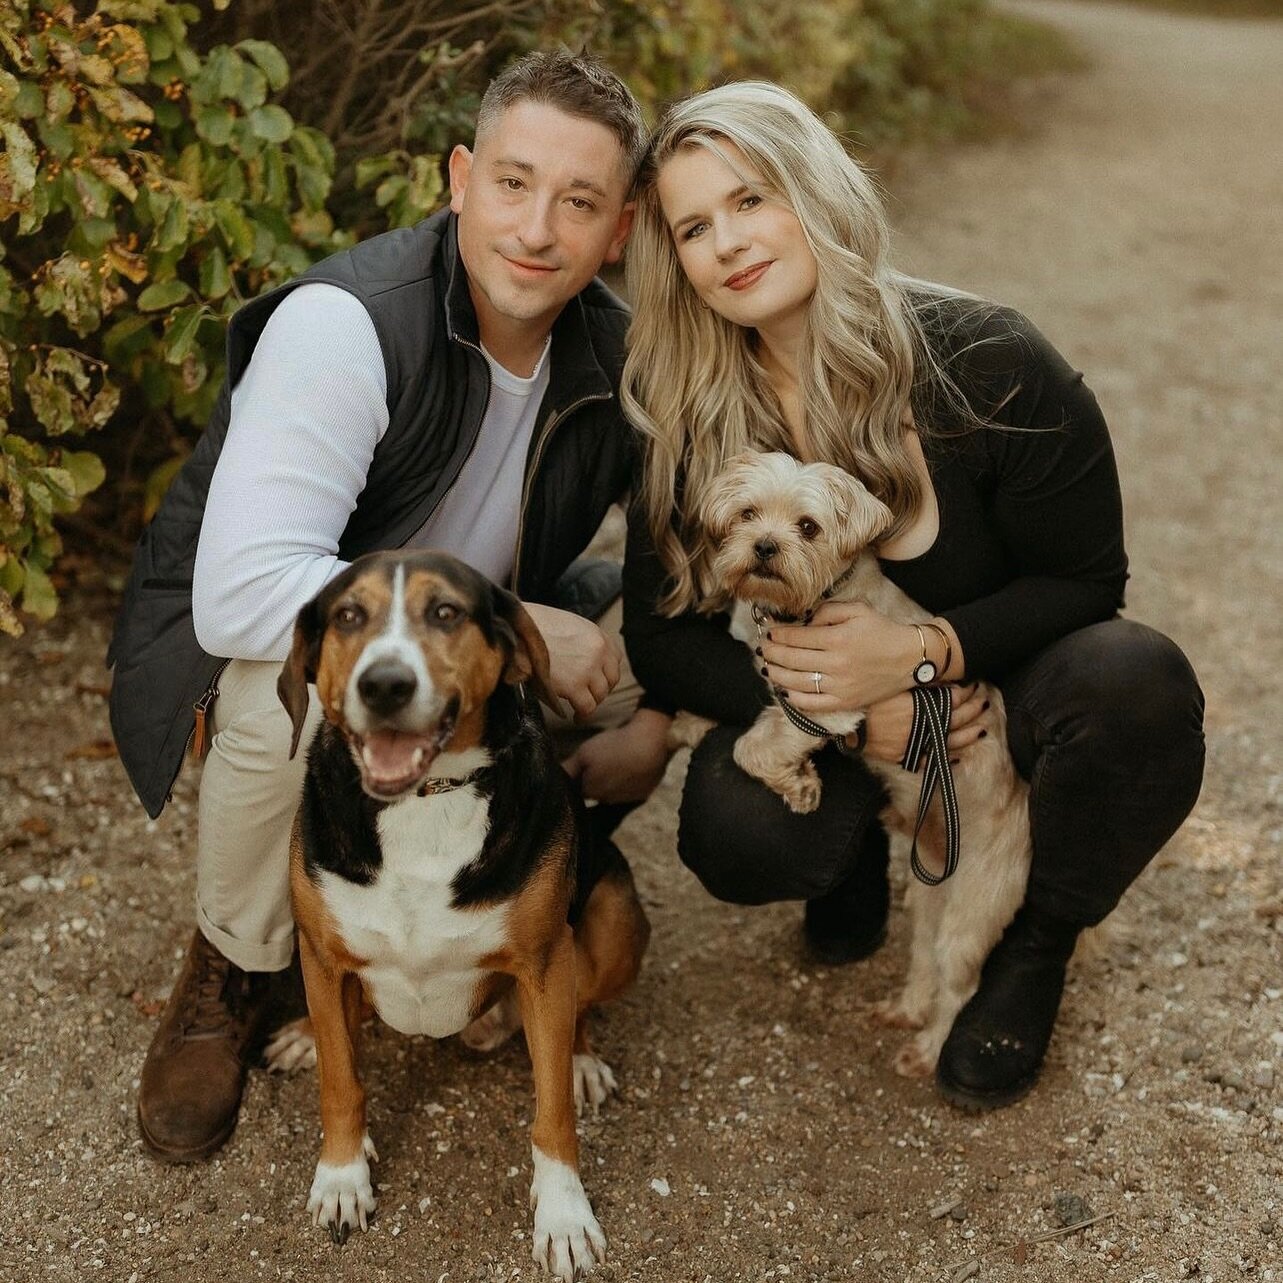 Welcome to the #marriedbyshelleyfam Rudy &amp; Buddy&rsquo;s &ldquo;Paw-Rents&rdquo; Caleigh &amp; Anthony! 
&bull;
🐾 Can&rsquo;t wait to hear more about your L❤️VE STORY and the adventures you&rsquo;ve had so far with these adorable tail waggers ! 